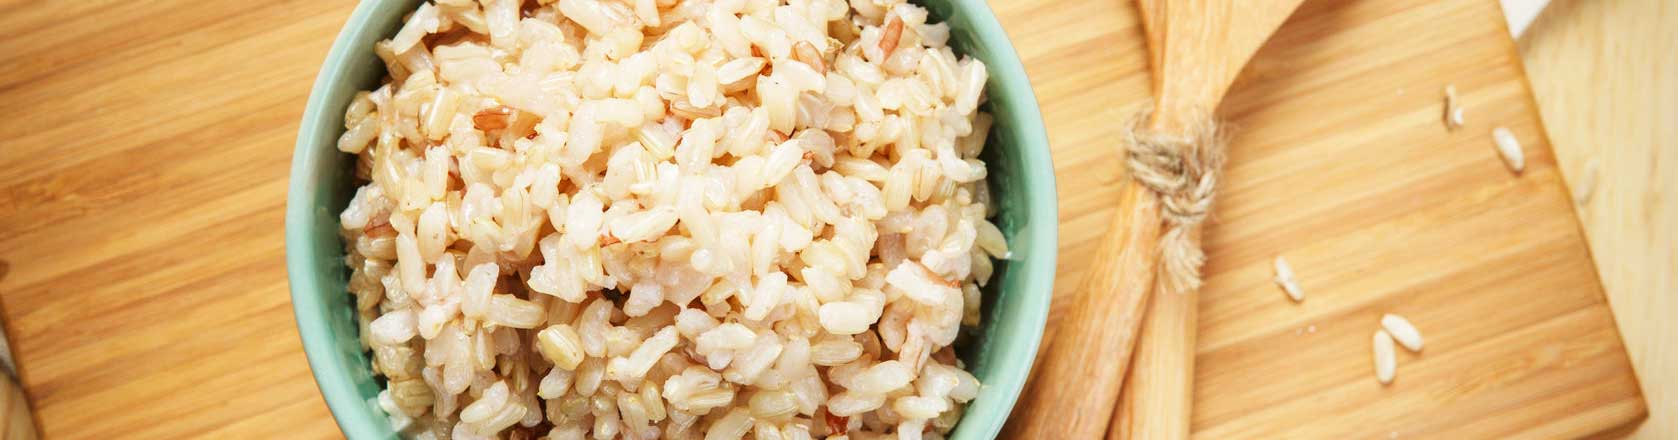 which is healthier brown rice vs. white rice